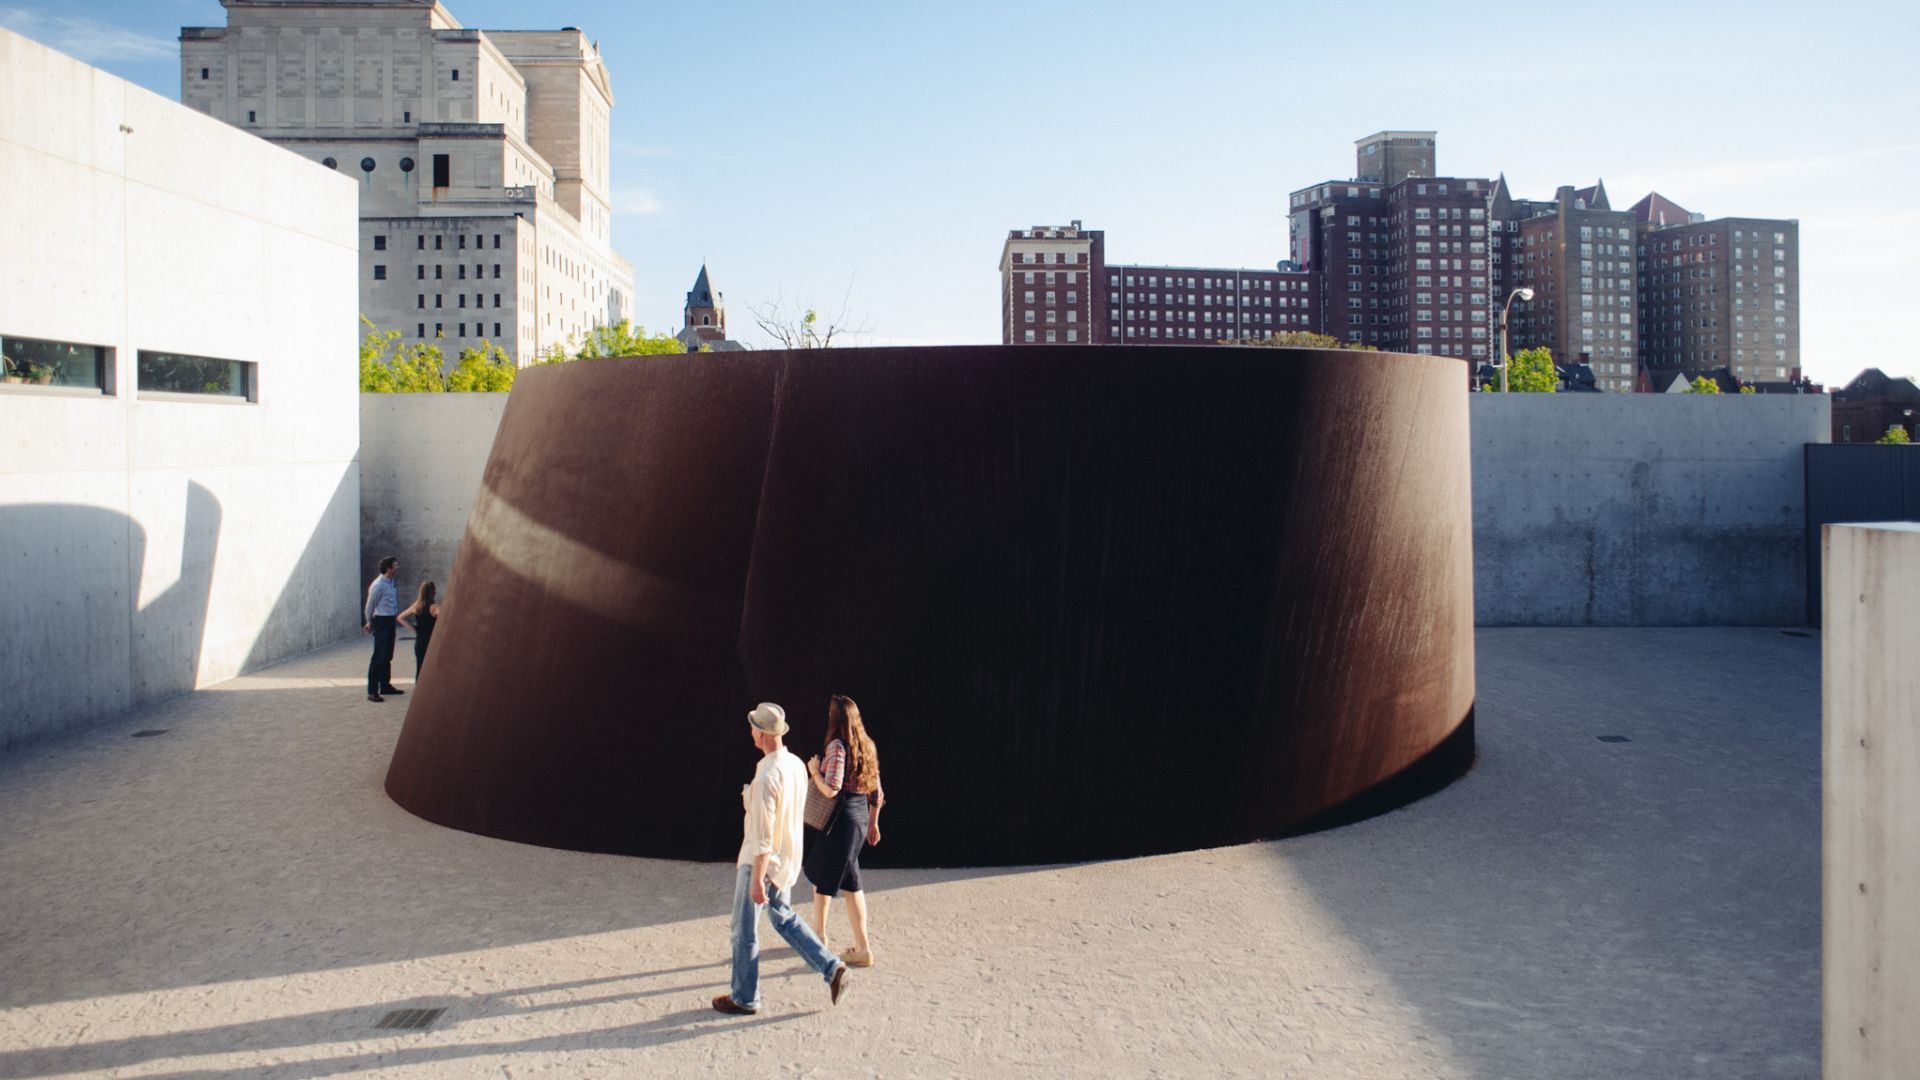 People walk around a permanent outdoor sculpture at the Pulitzer Arts Foundation.